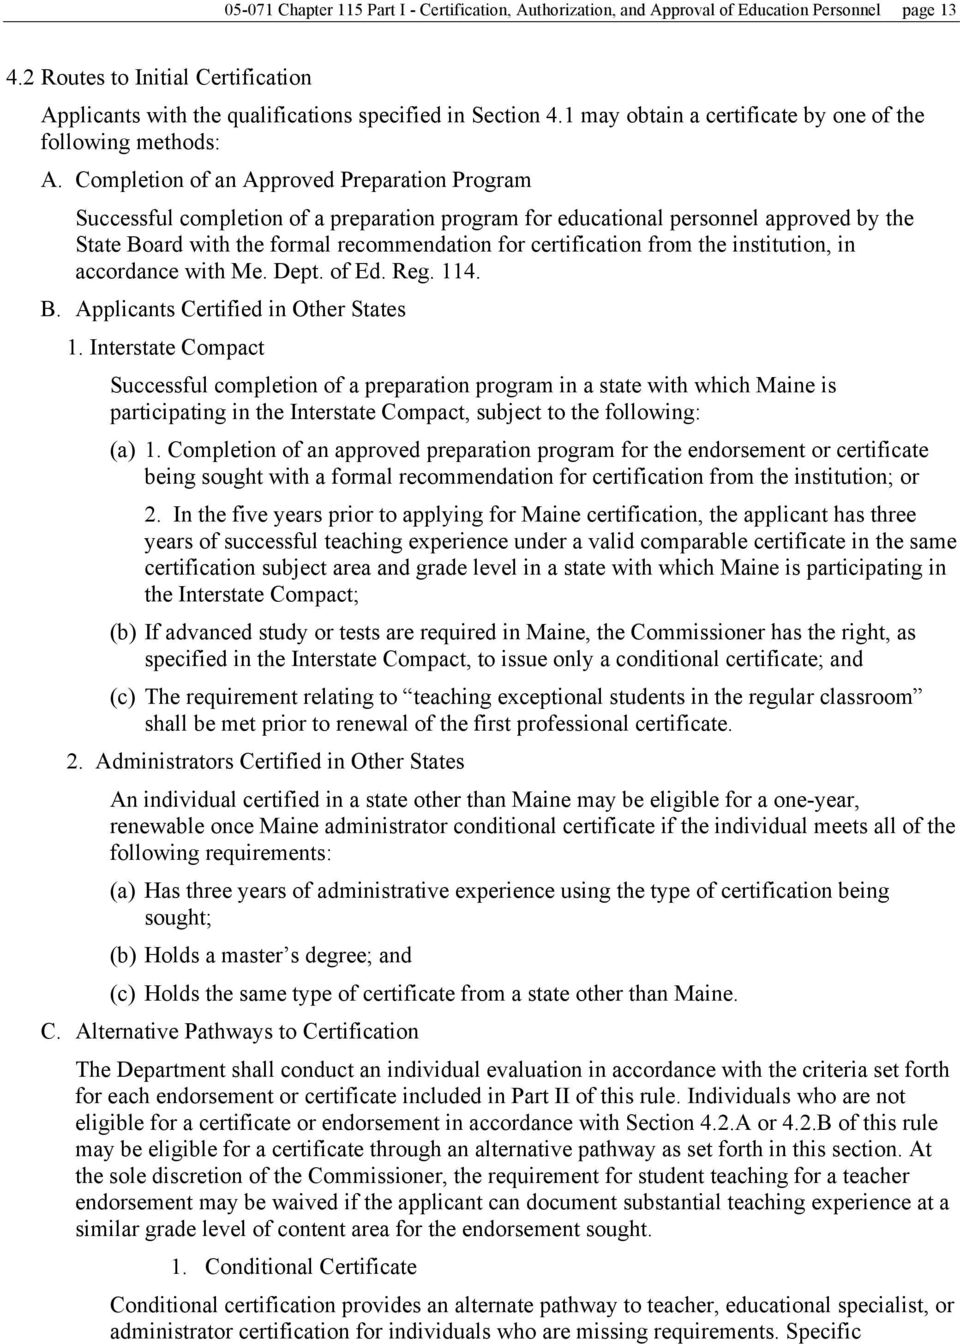 Completion of an Approved Preparation Program Successful completion of a preparation program for educational personnel approved by the State Board with the formal recommendation for certification